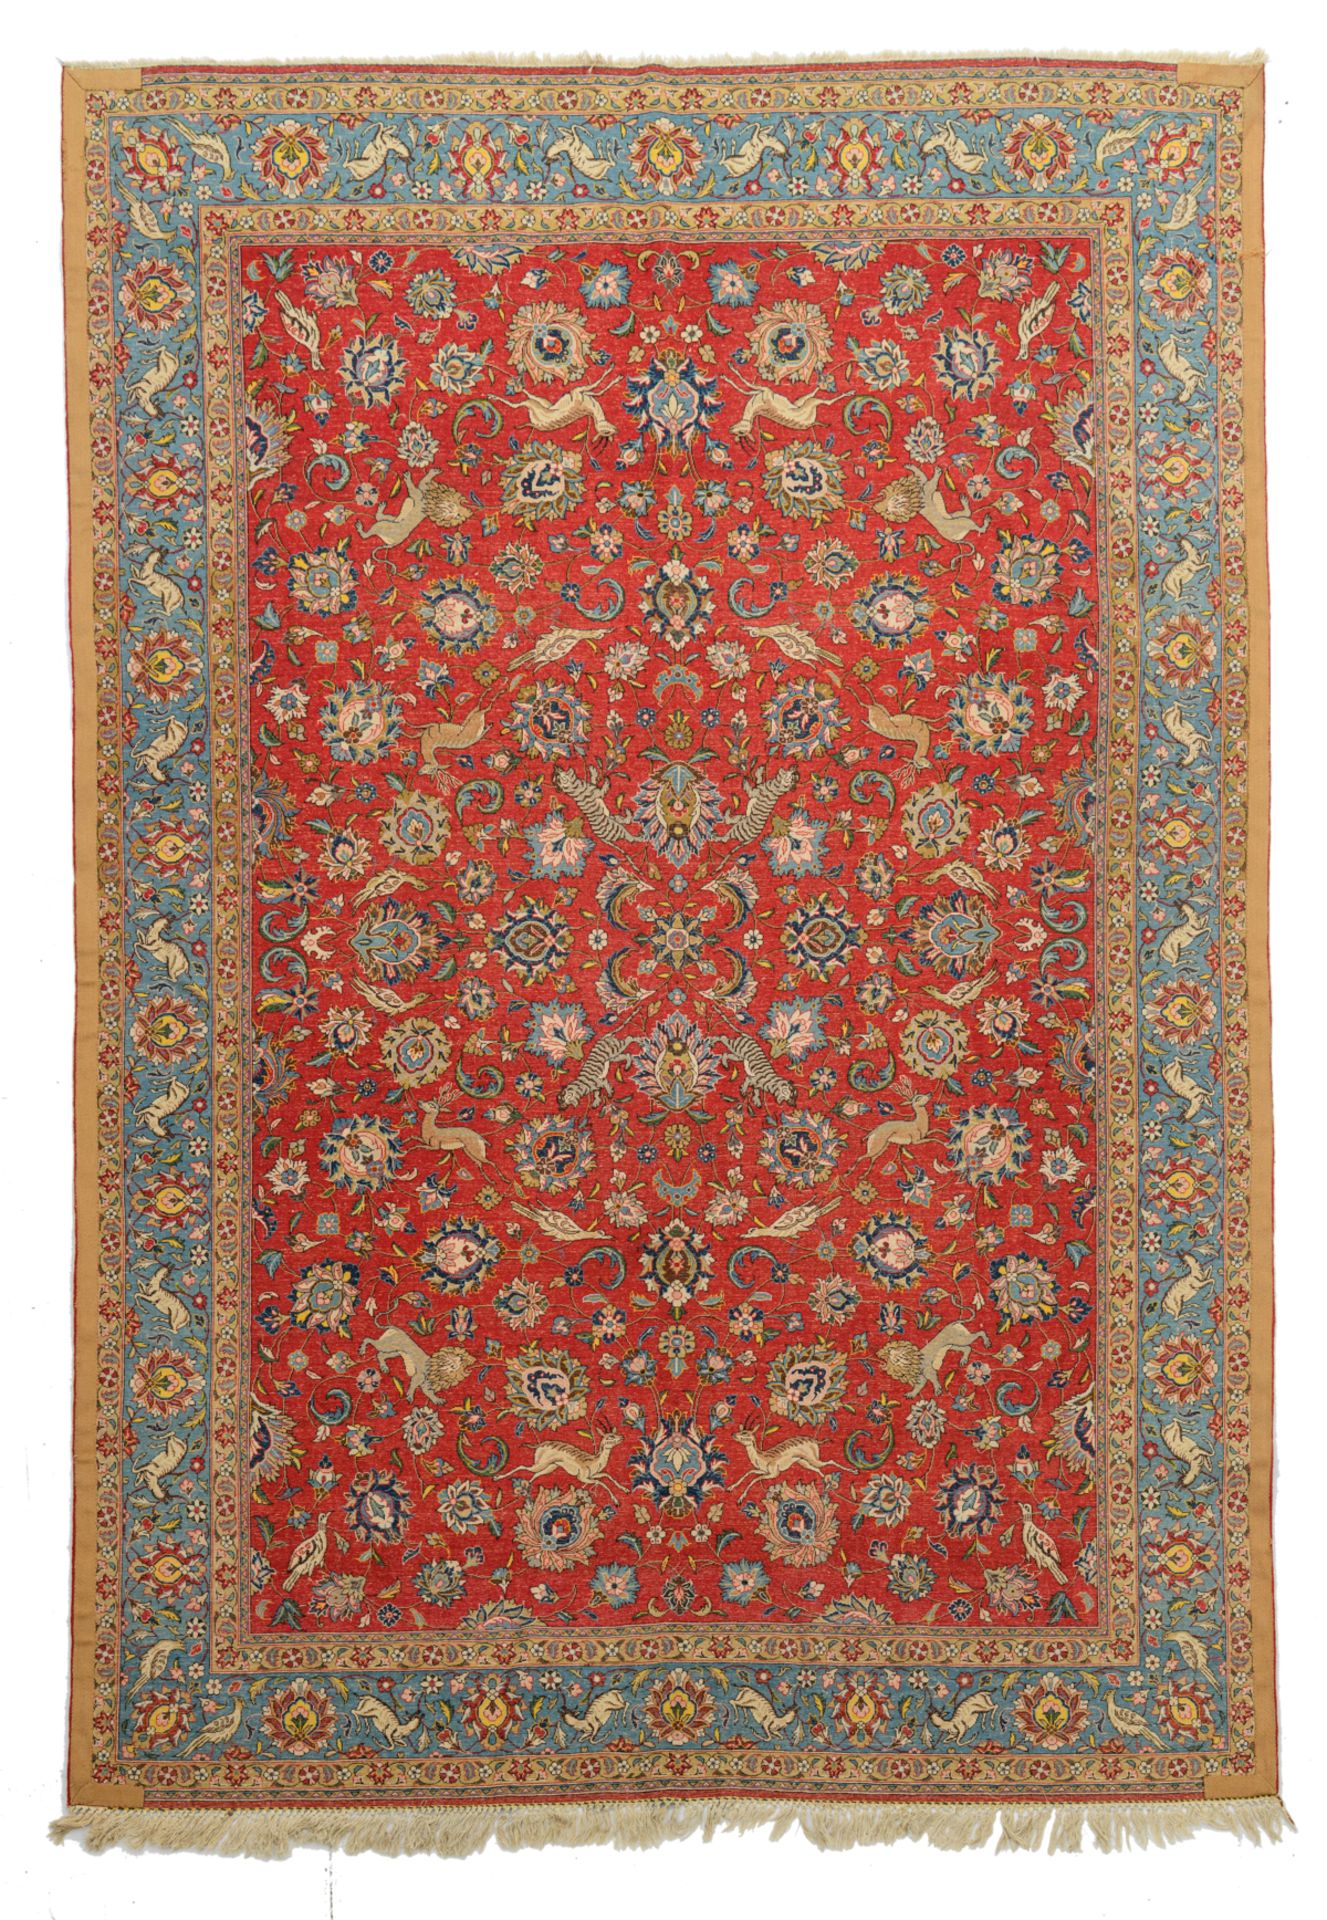 An Oriental woollen rug, decorated with hunting lions, deer and birds surrounded by flowers, 234 x 3 - Image 2 of 5